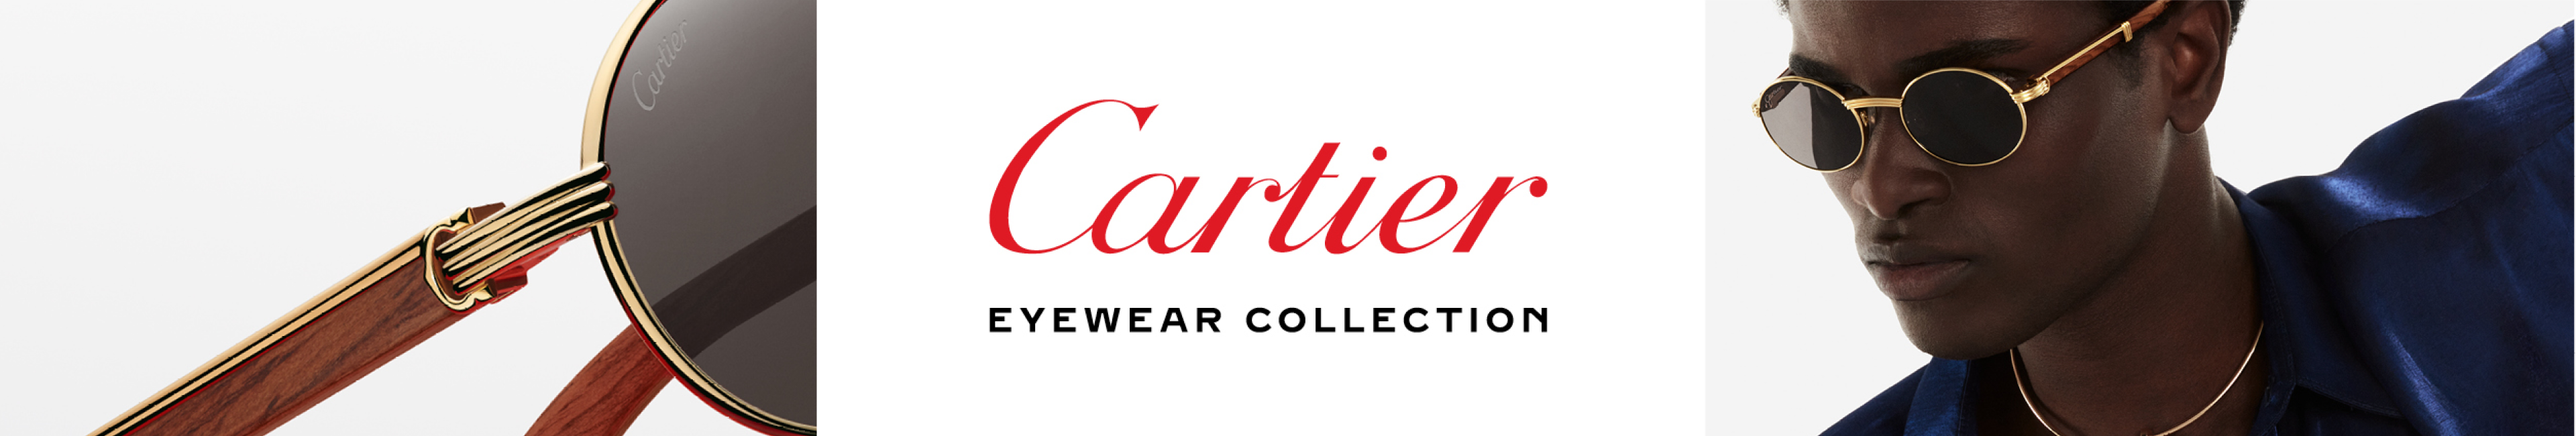 Cartier Collection Banner Image